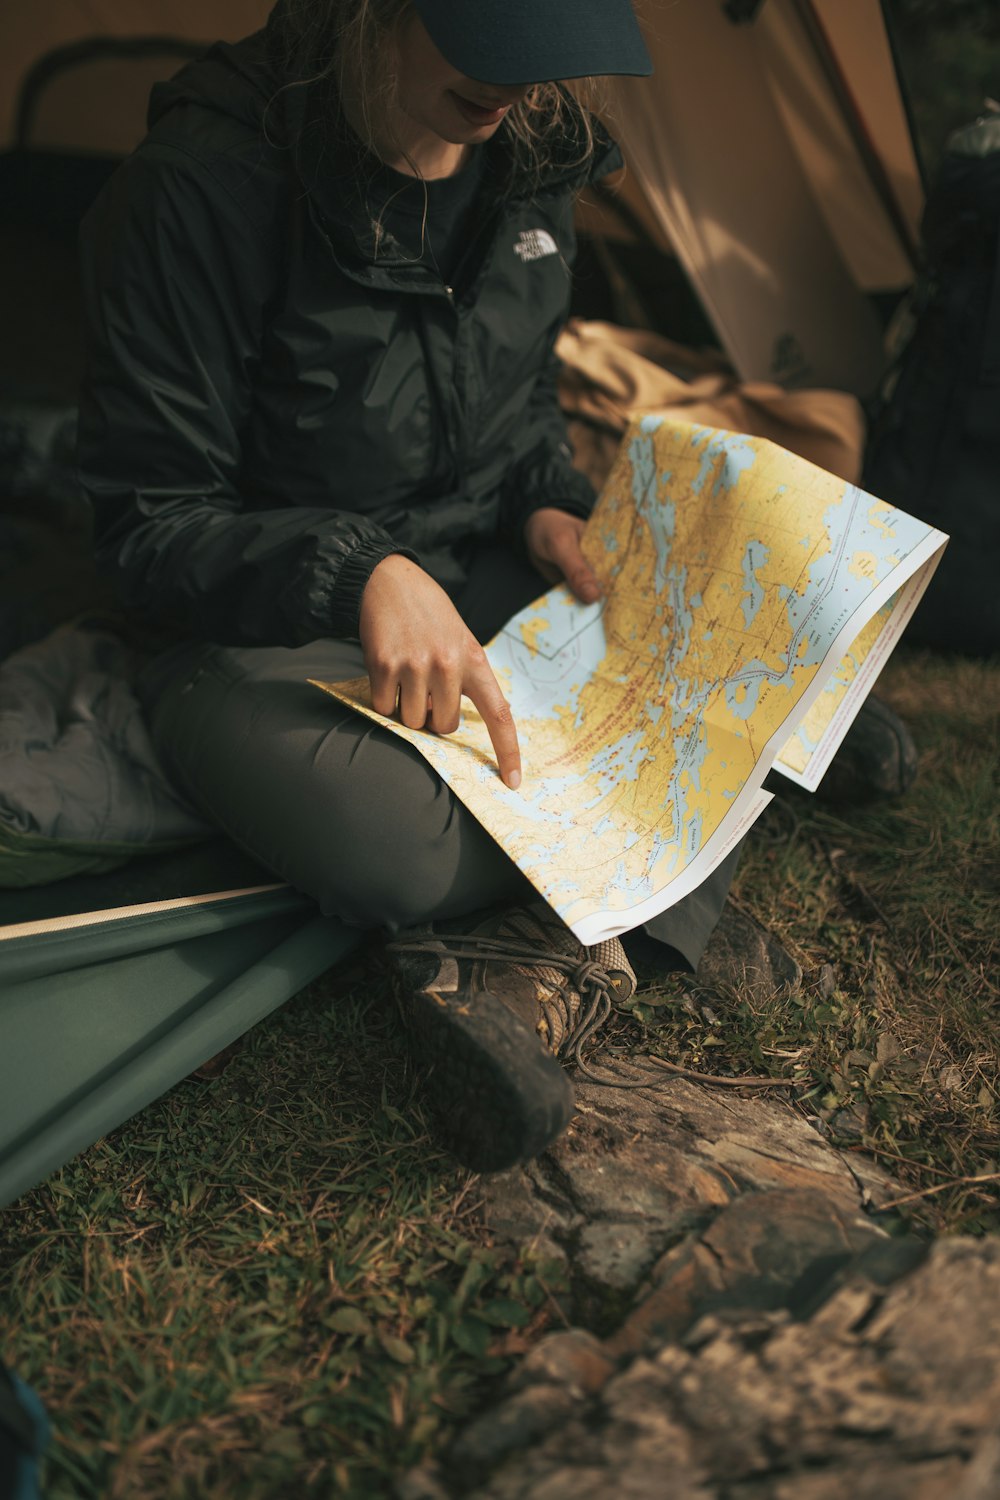 person wearing The North Face jacket sitting on sofa while holding map